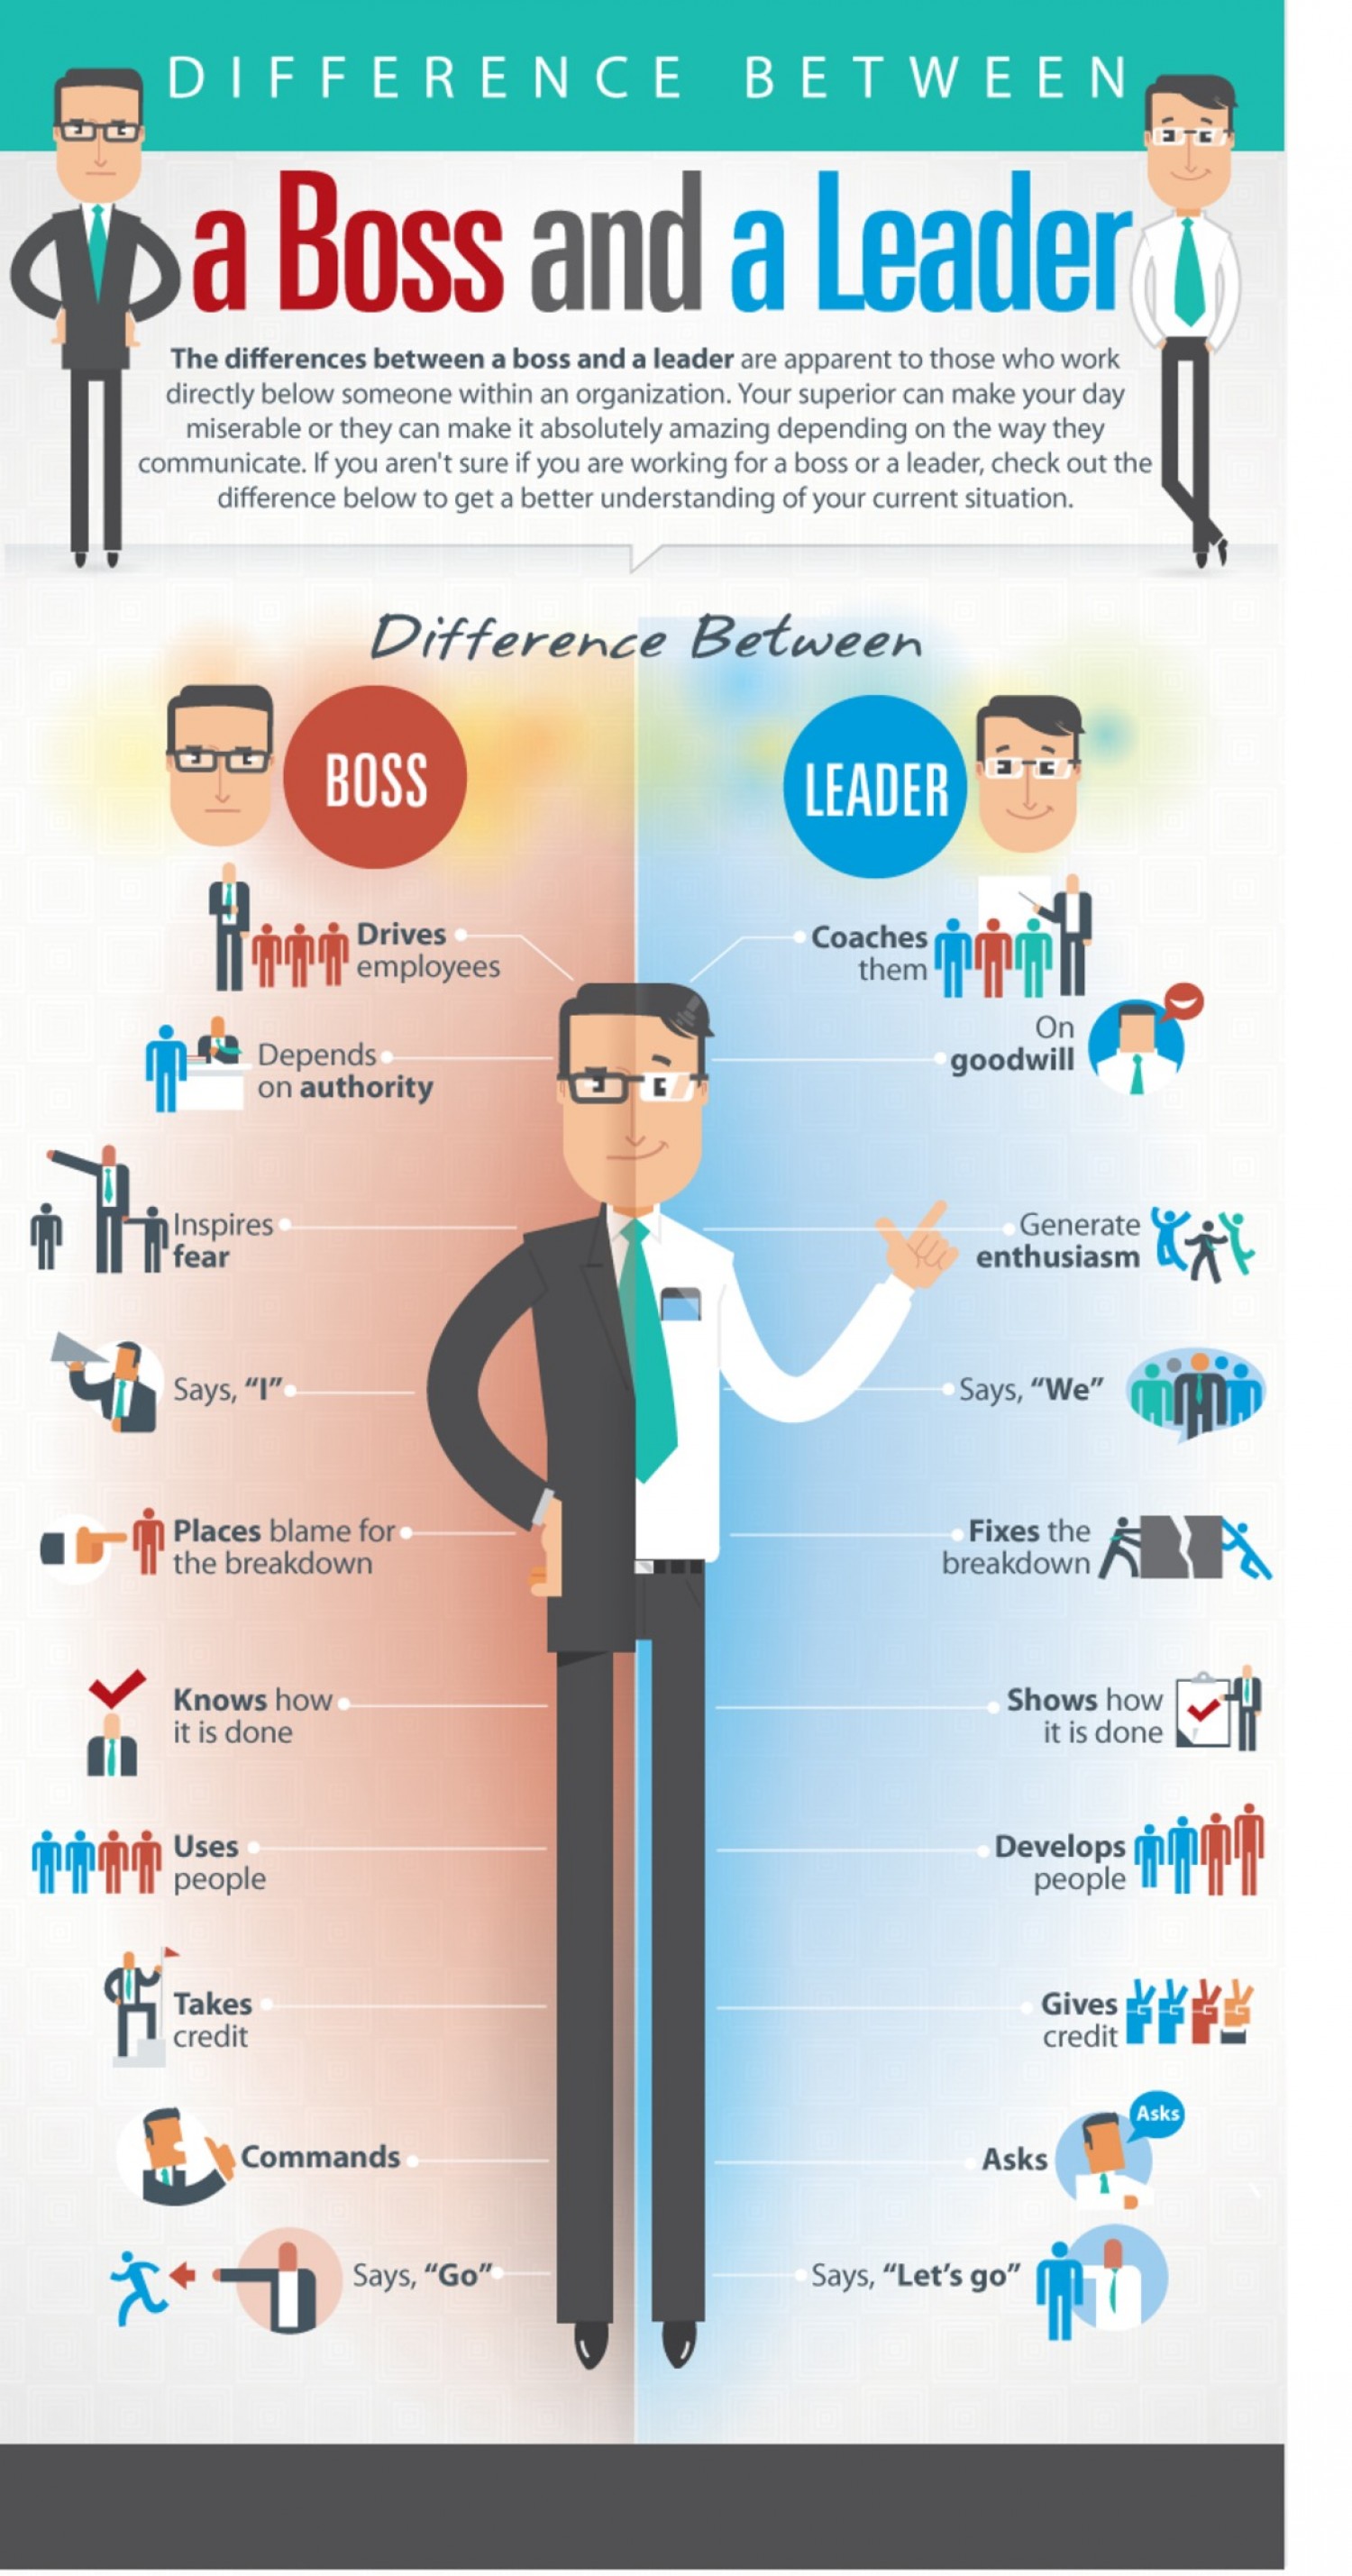 Glimte fusionere moral Difference Between A Boss And A Leader - CFR Group